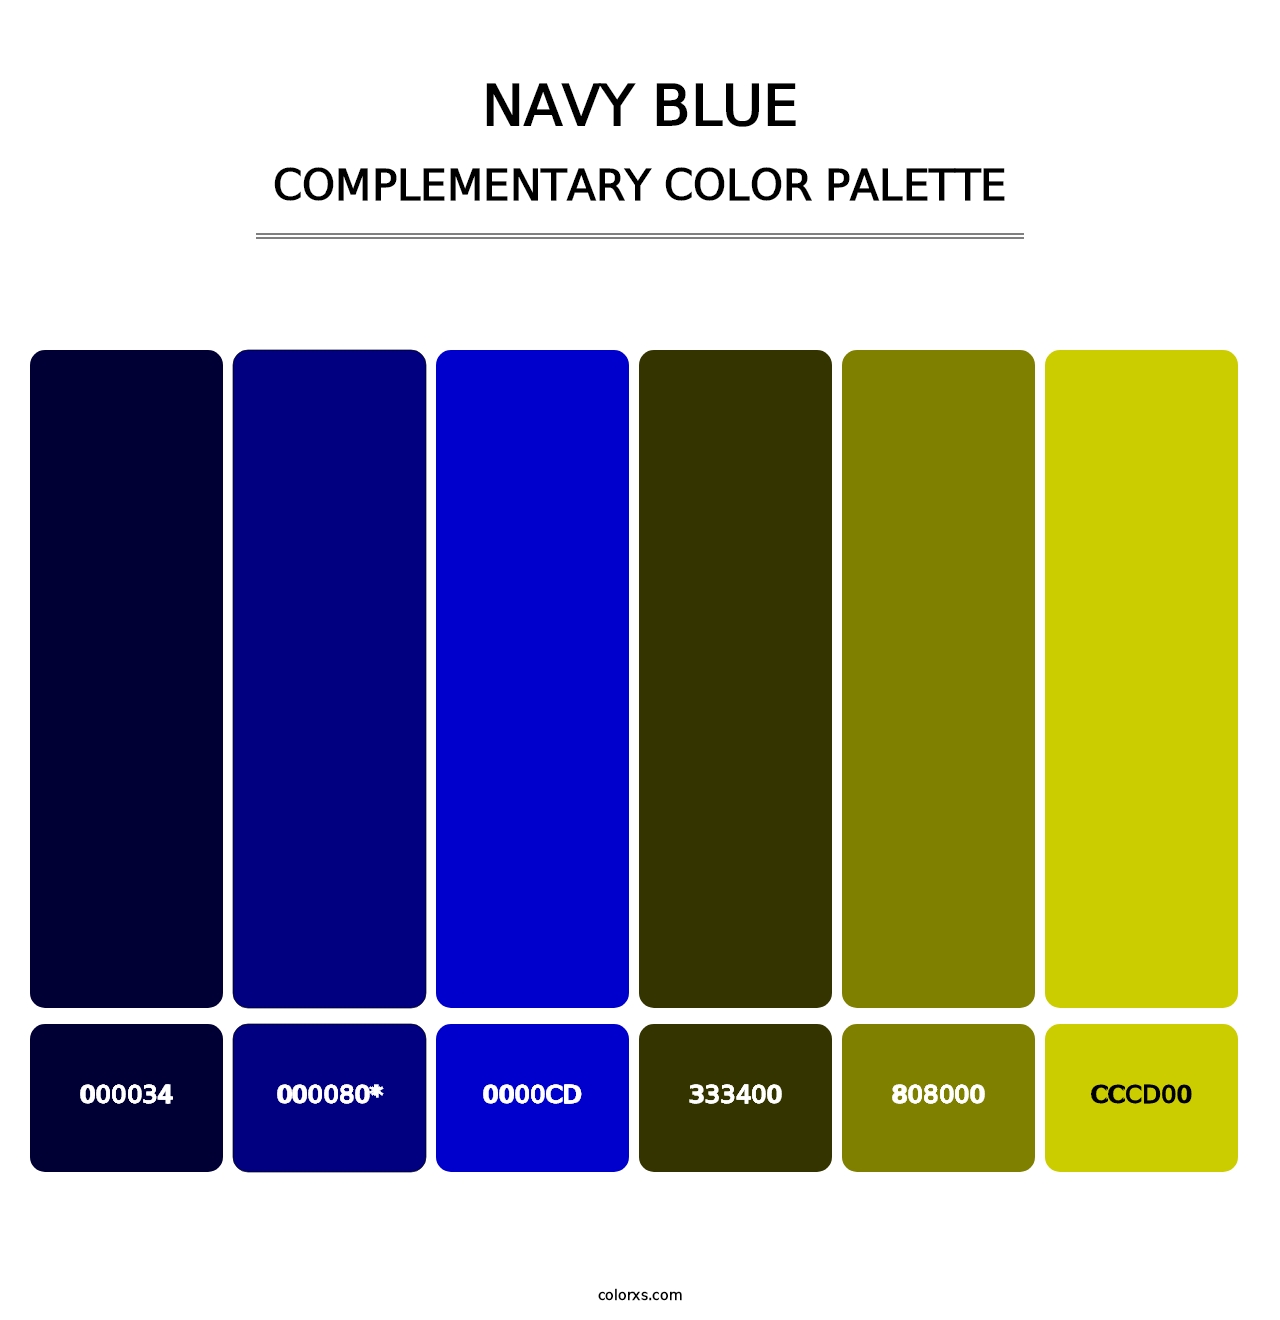 Navy Blue - Complementary Color Palette